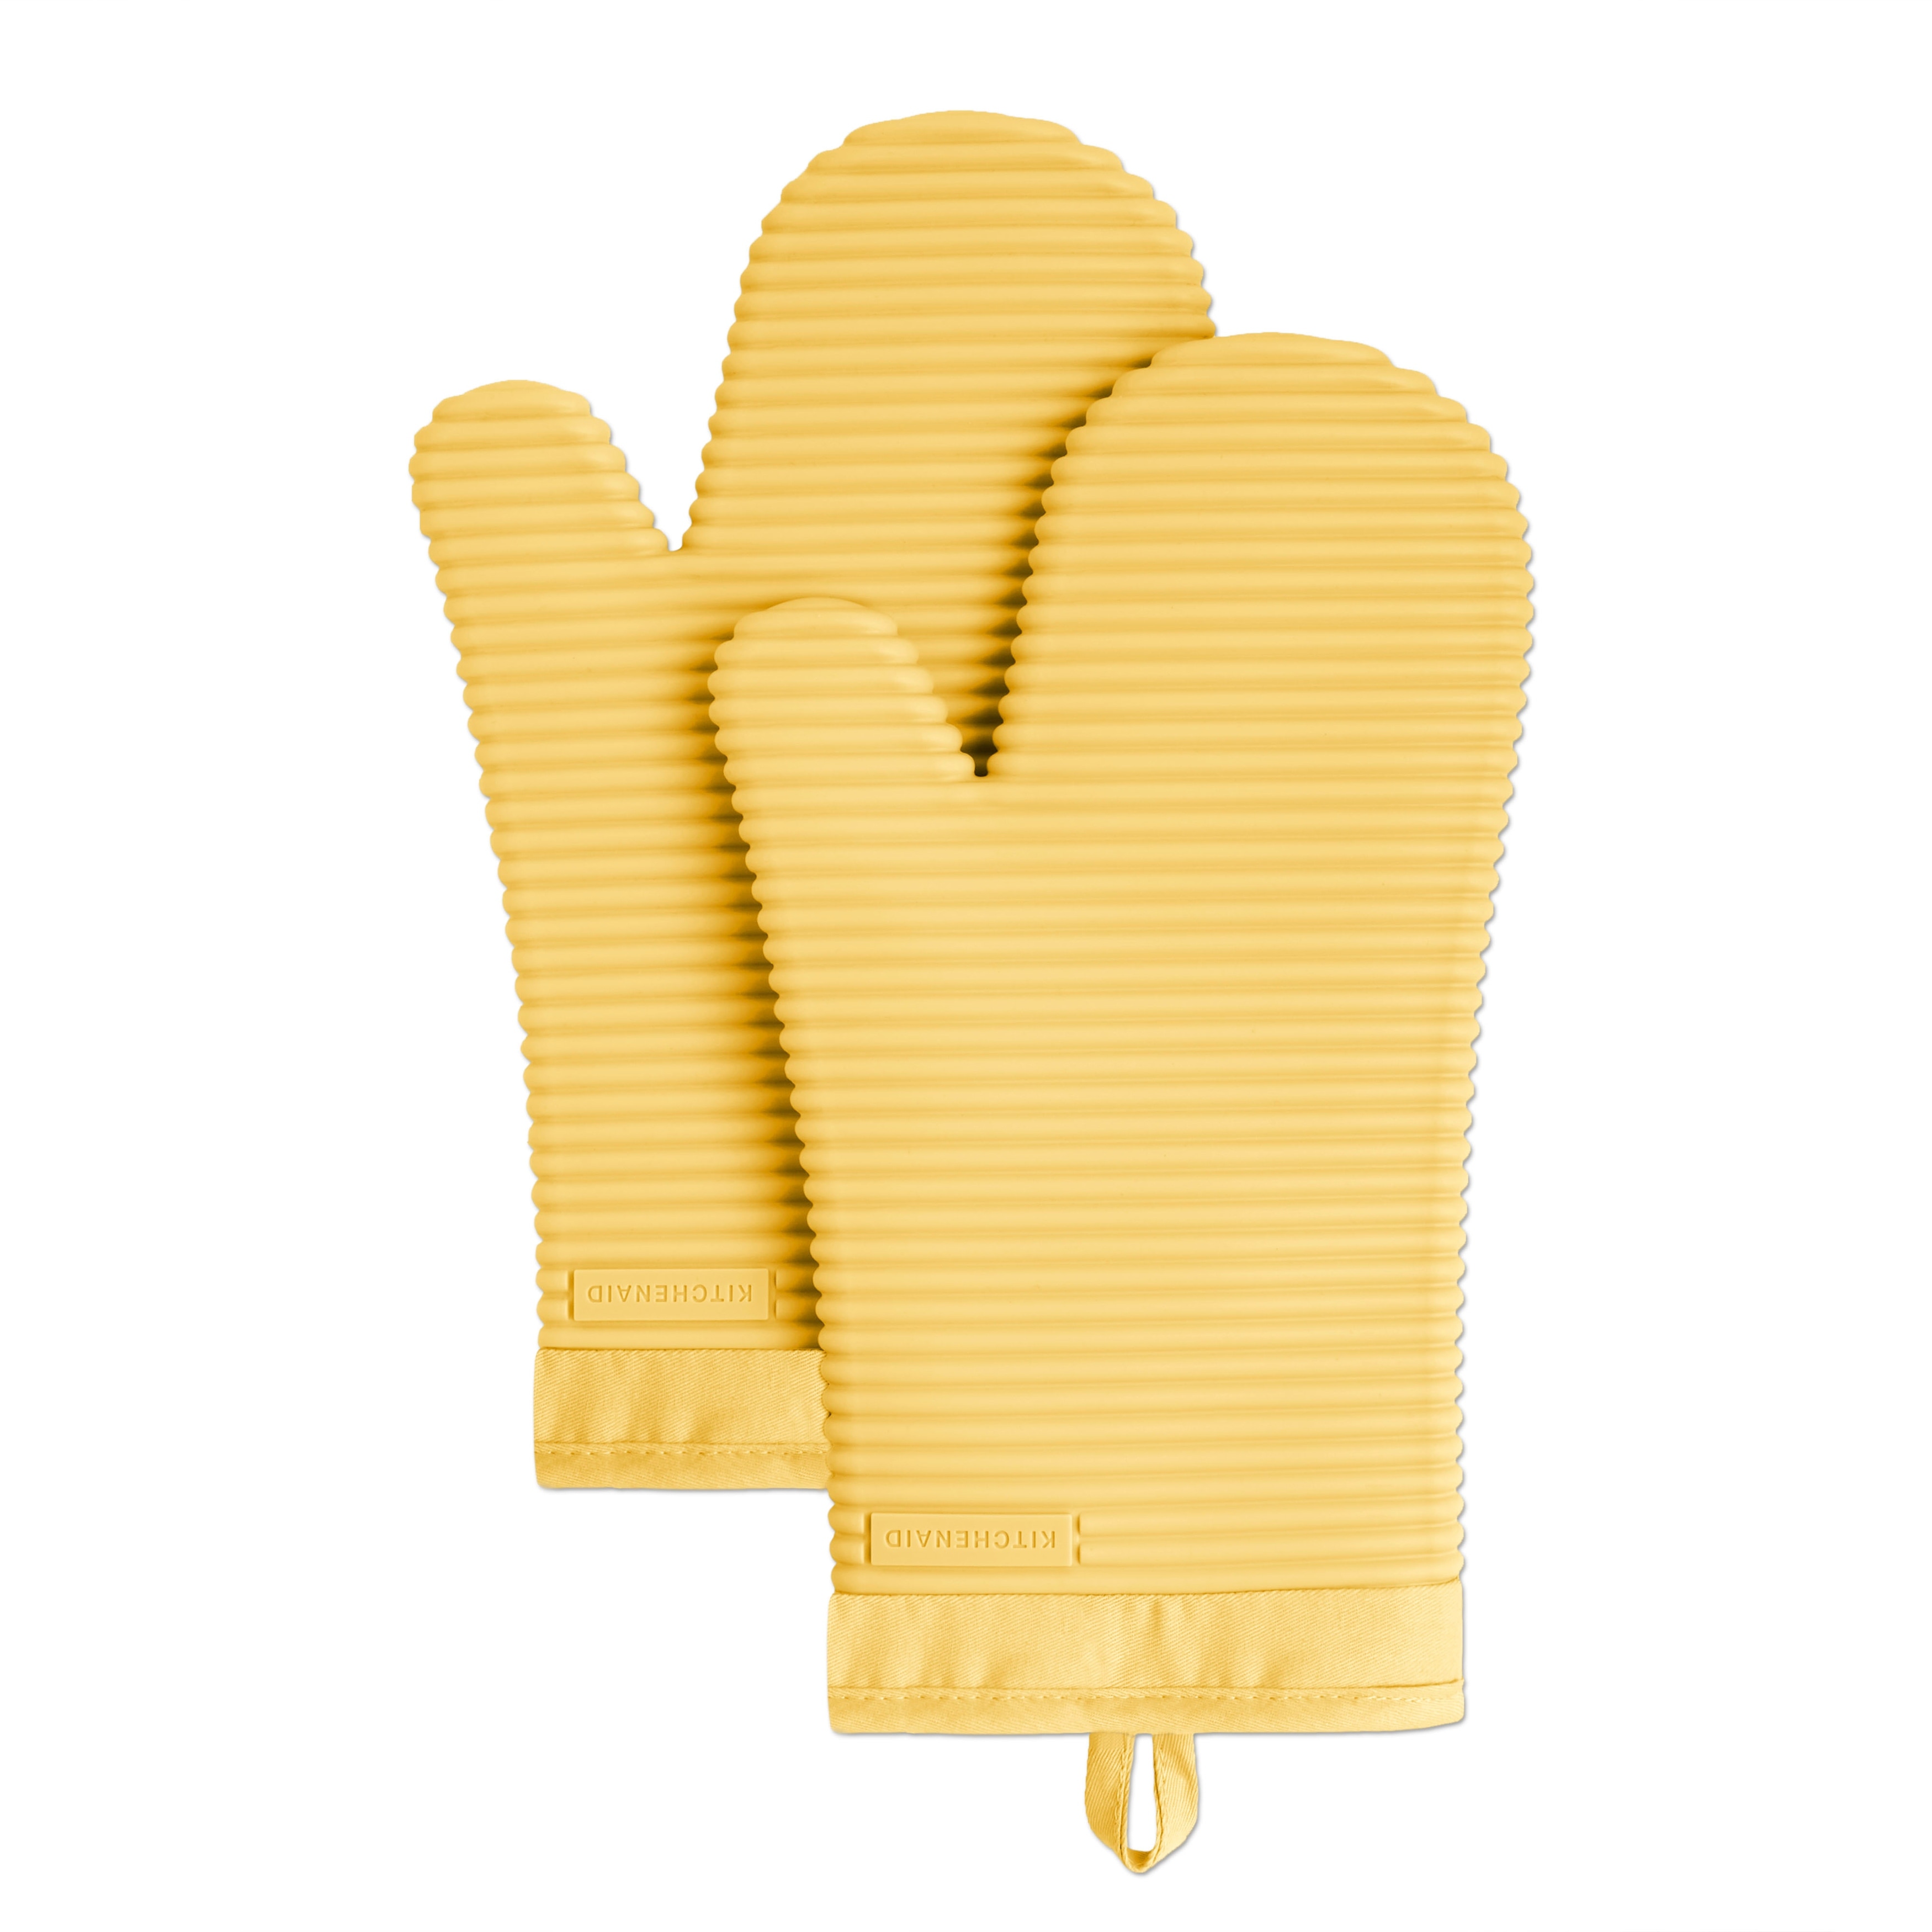 https://ak1.ostkcdn.com/images/products/is/images/direct/5ad7d3d8d101623e8edc1ffea55fcb3b1cee476a/KitchenAid-Ribbed-Soft-Silicone-Oven-Mitt-Set%2C-7.5%22x13%22%2C-2-Pack.jpg